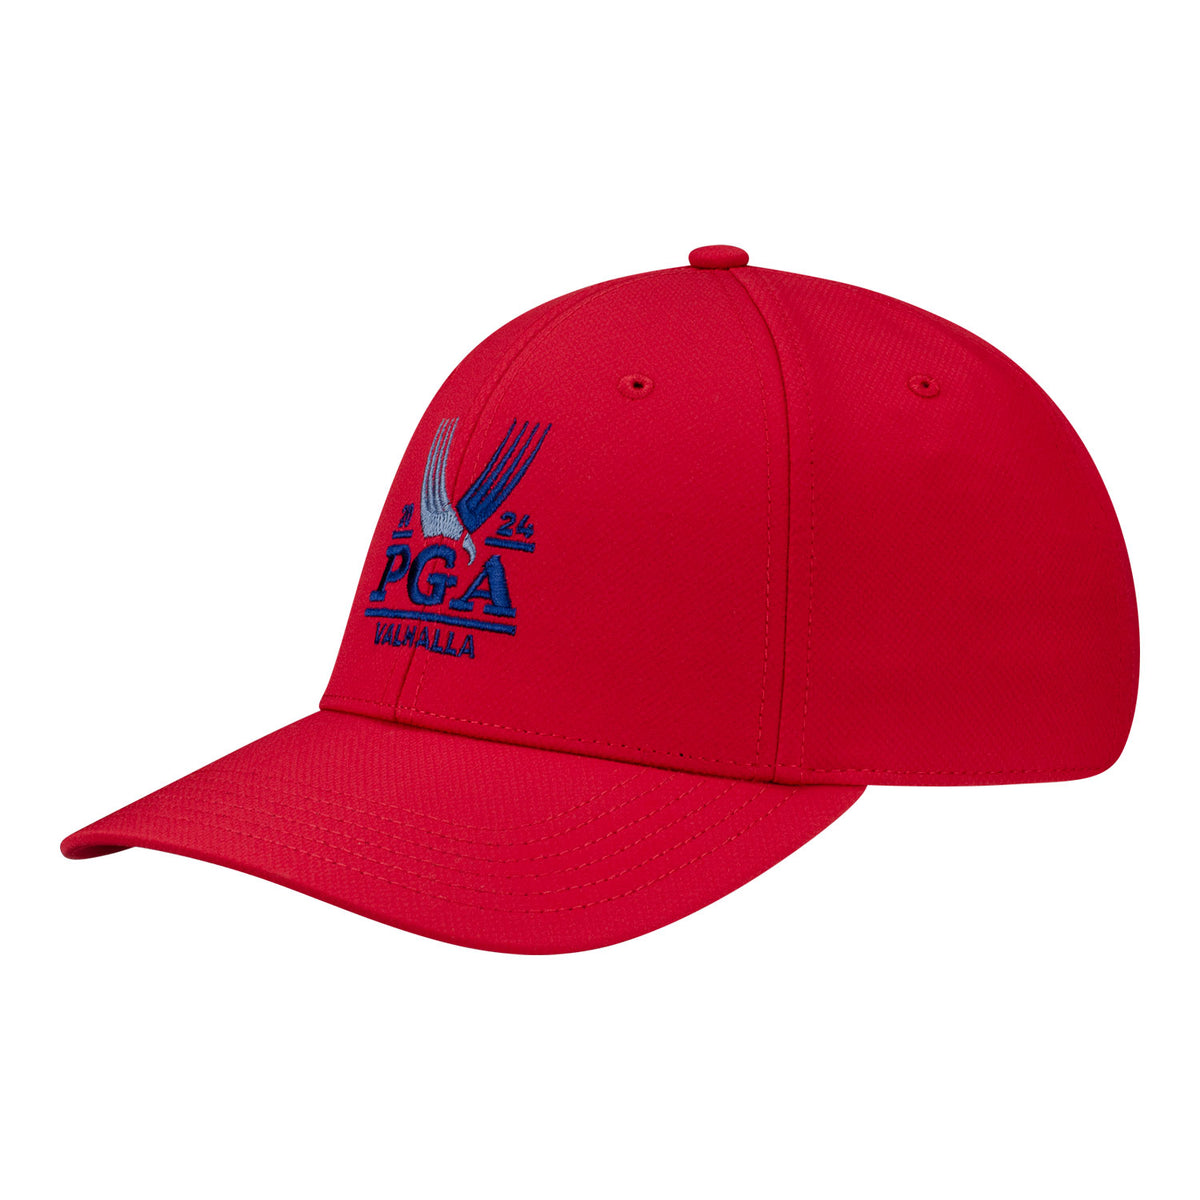 Ahead 2024 PGA Championship Structured Tech Hat in University Red - Angled Front Left View